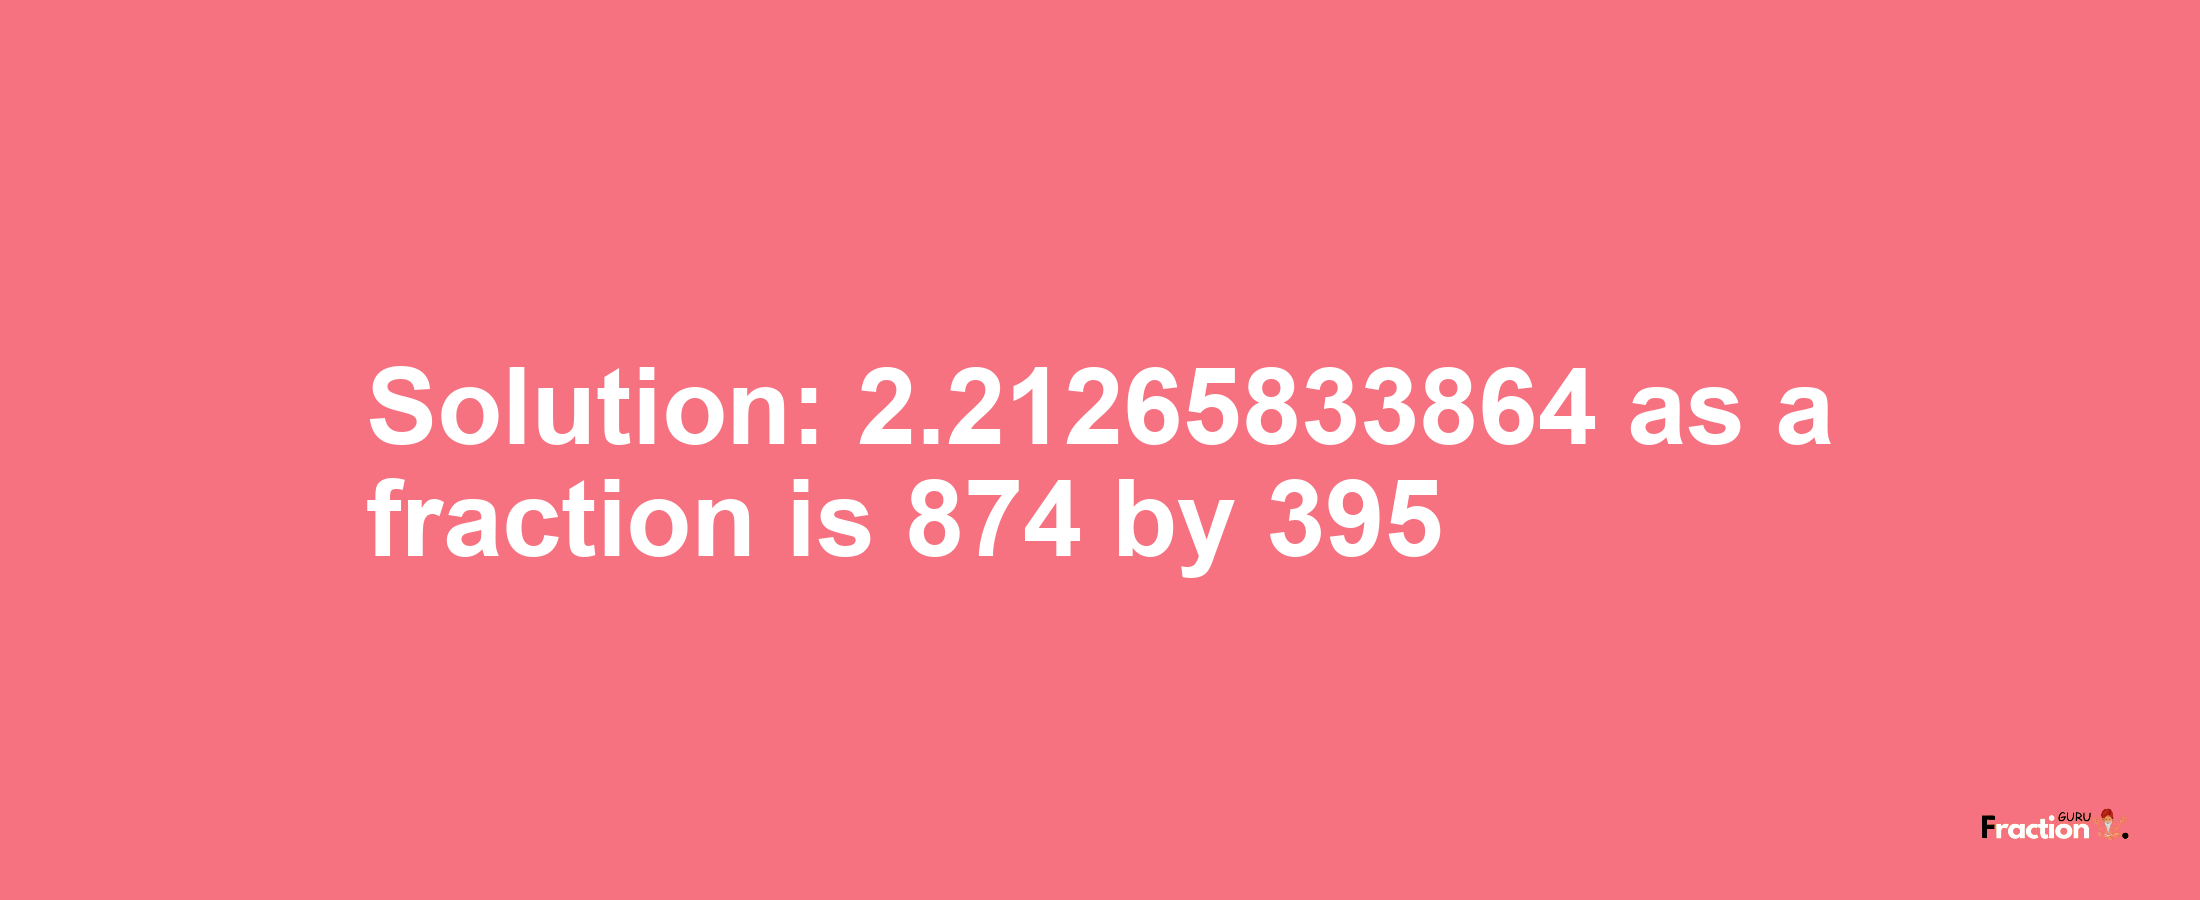 Solution:2.21265833864 as a fraction is 874/395